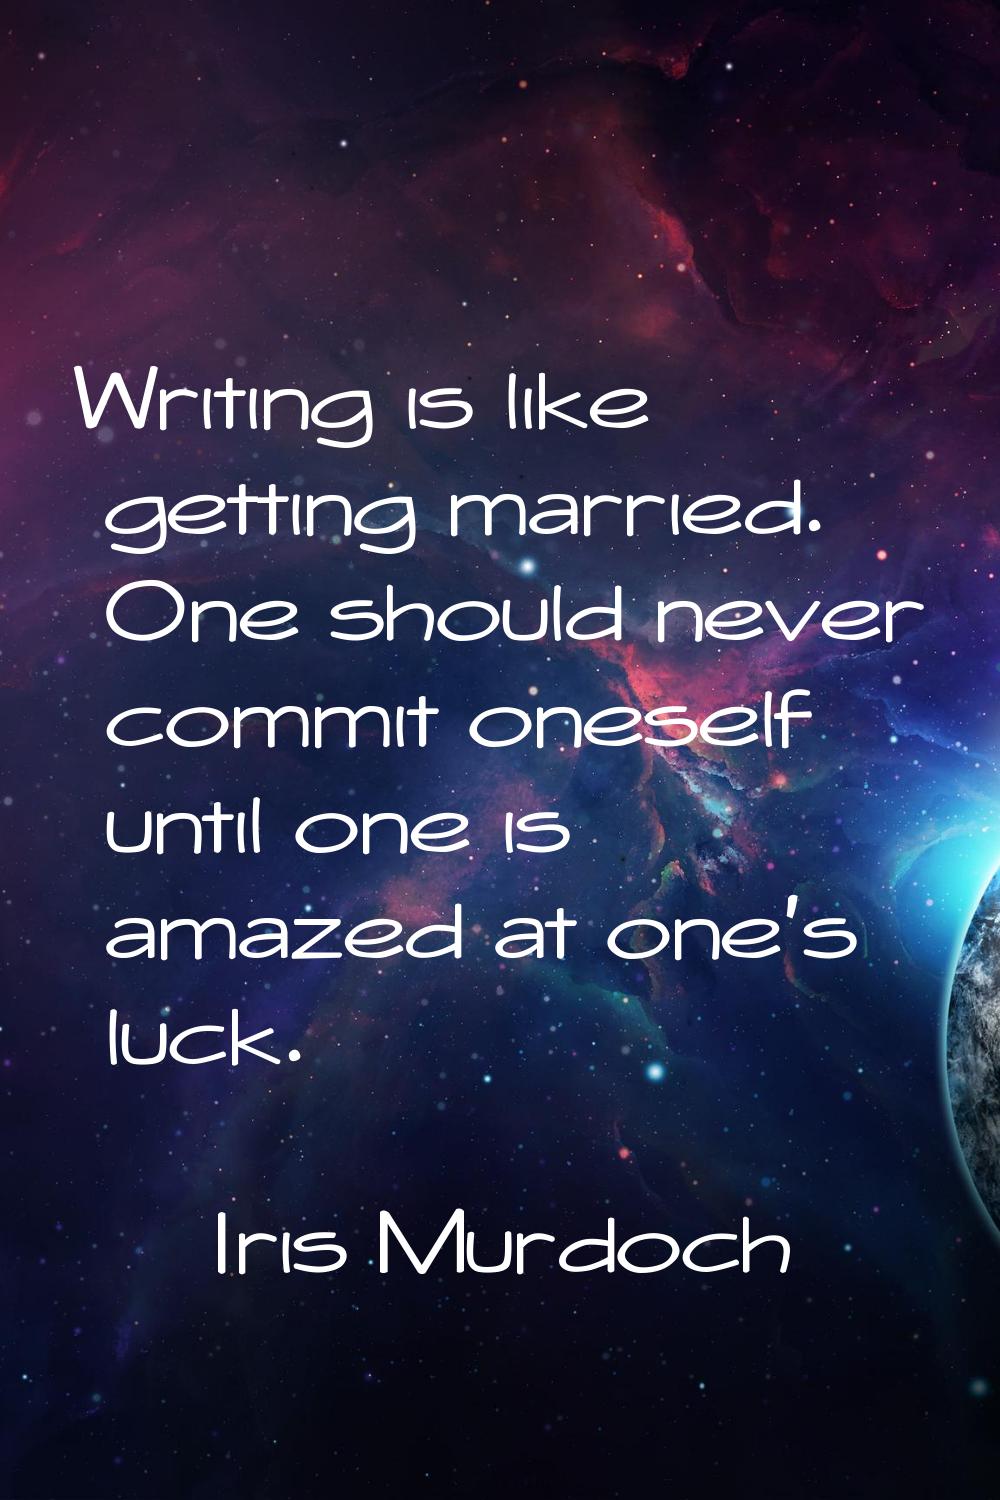 Writing is like getting married. One should never commit oneself until one is amazed at one's luck.